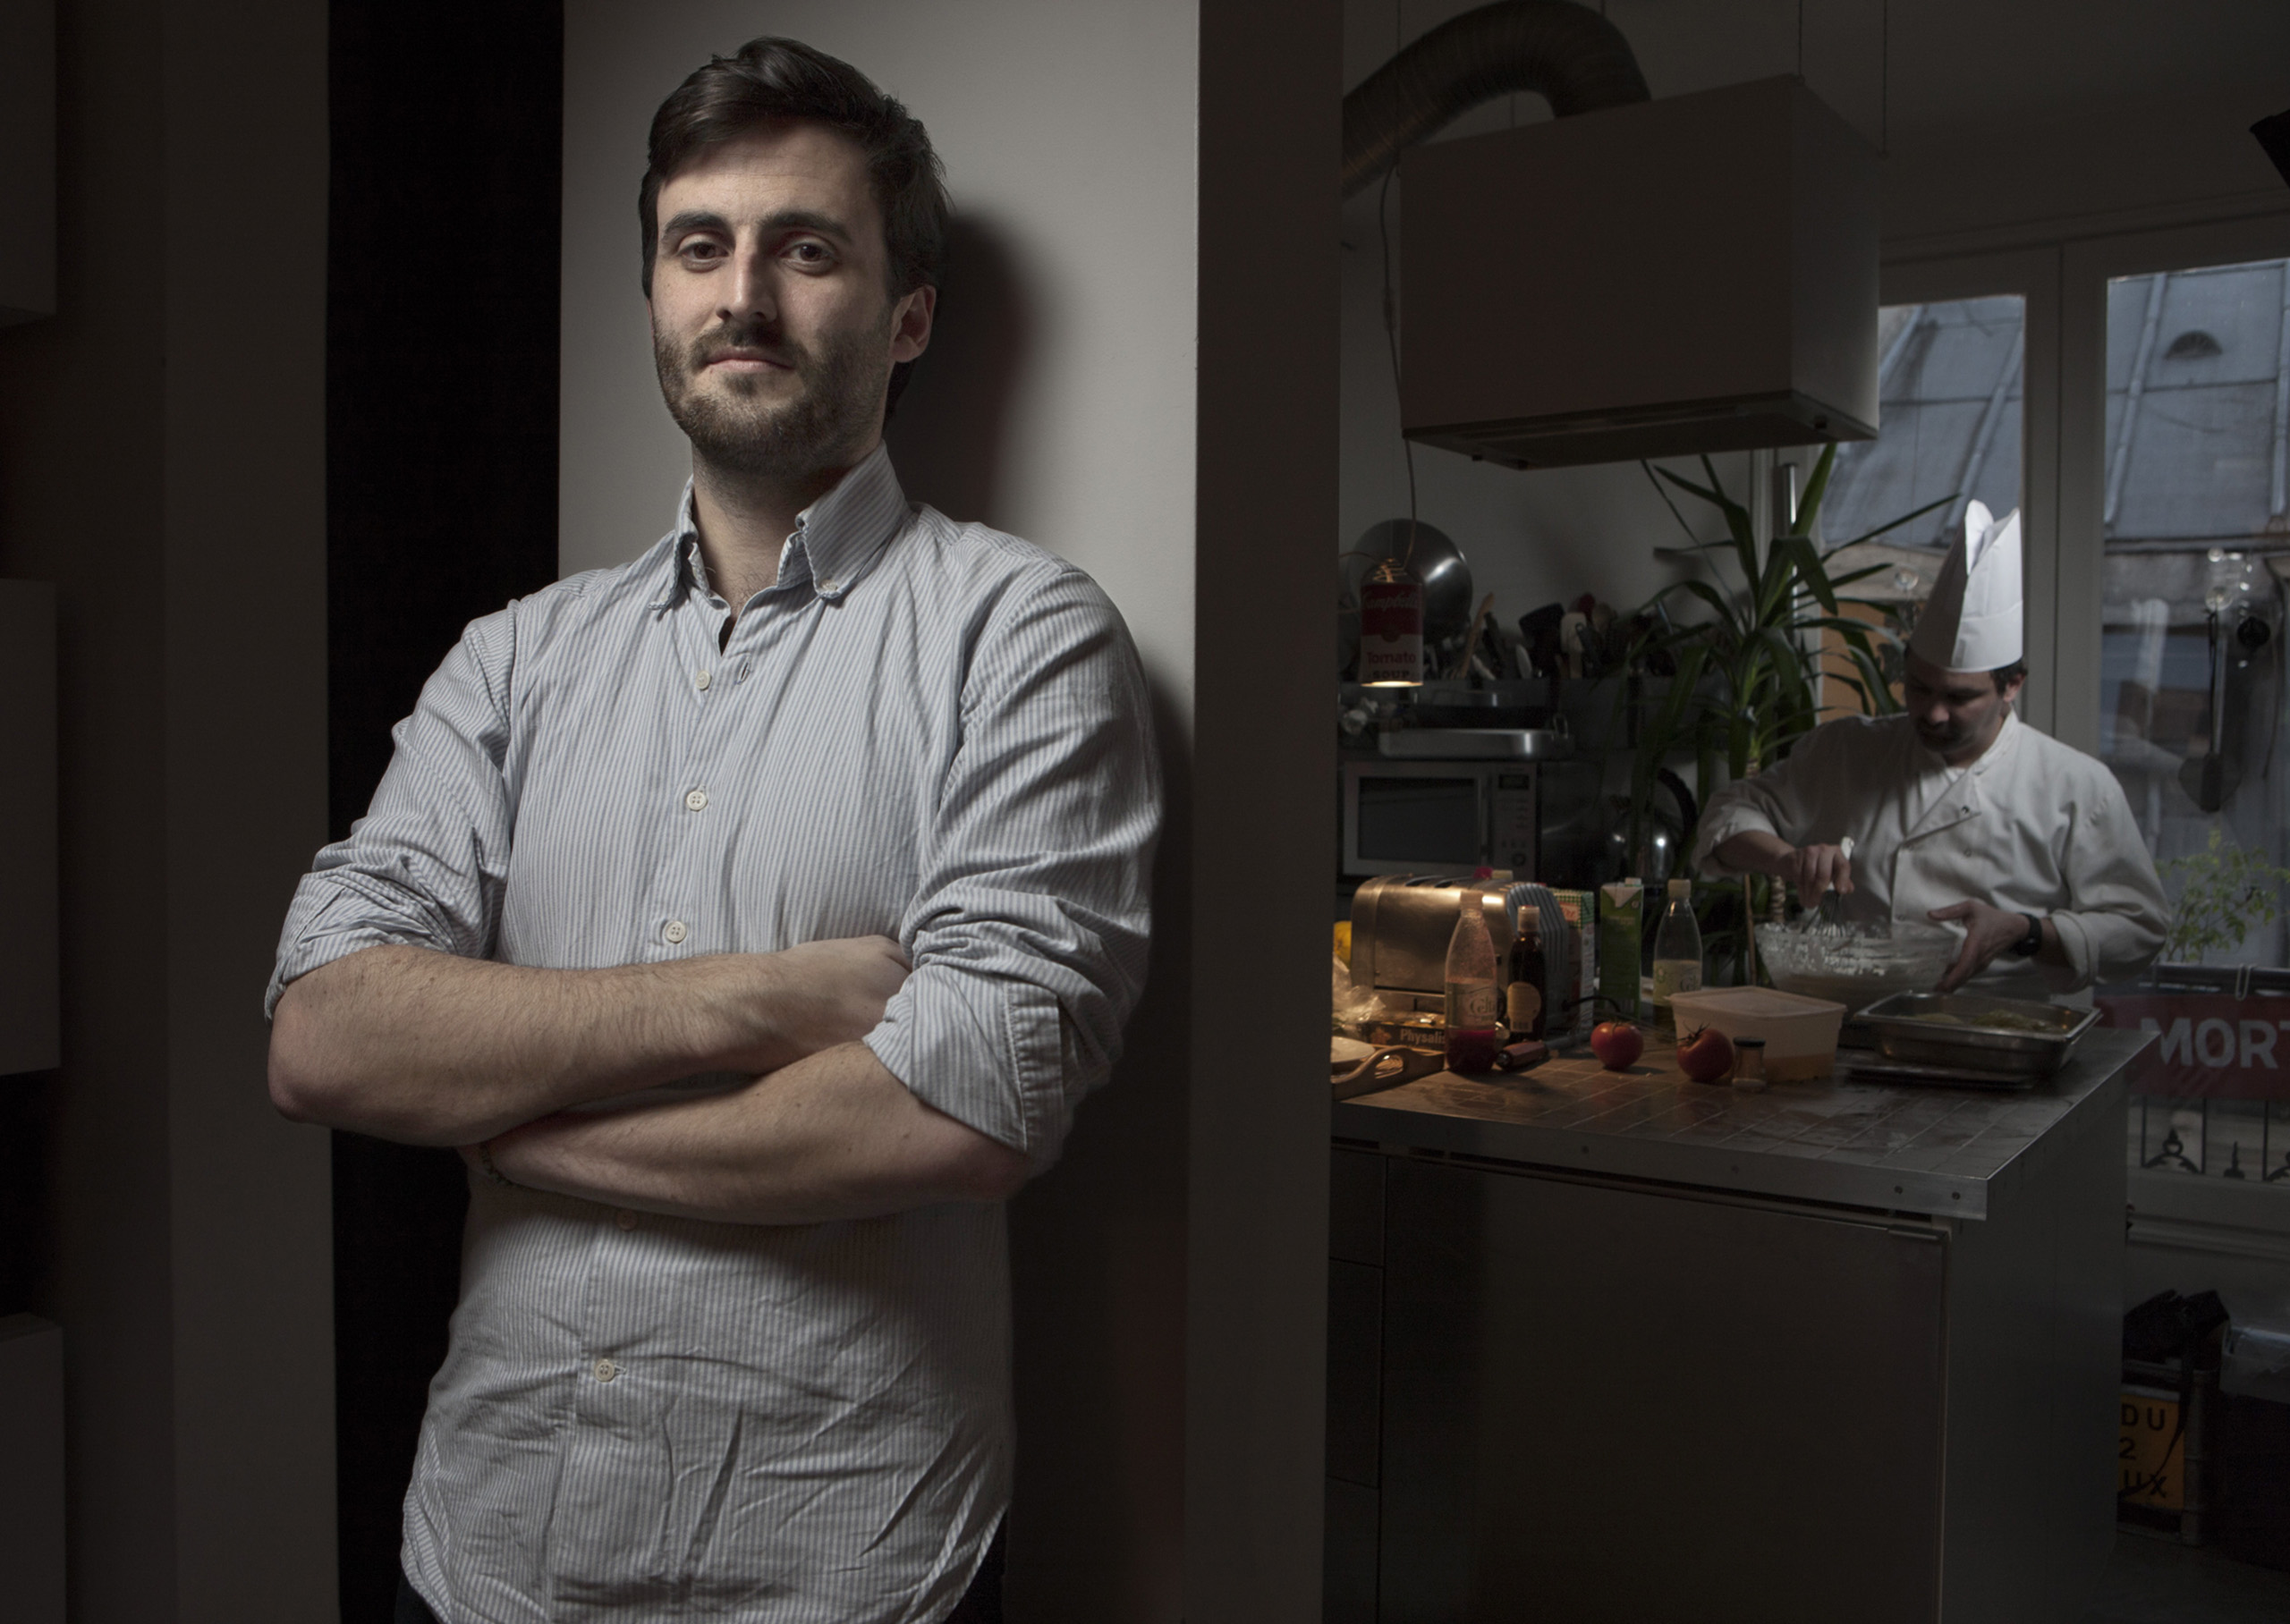 Stephen Leguillon of La Belle Assiette photographed in a Parisian home while testing out the cuisine of a new chef. (Christopher Morris—VII for TIME)